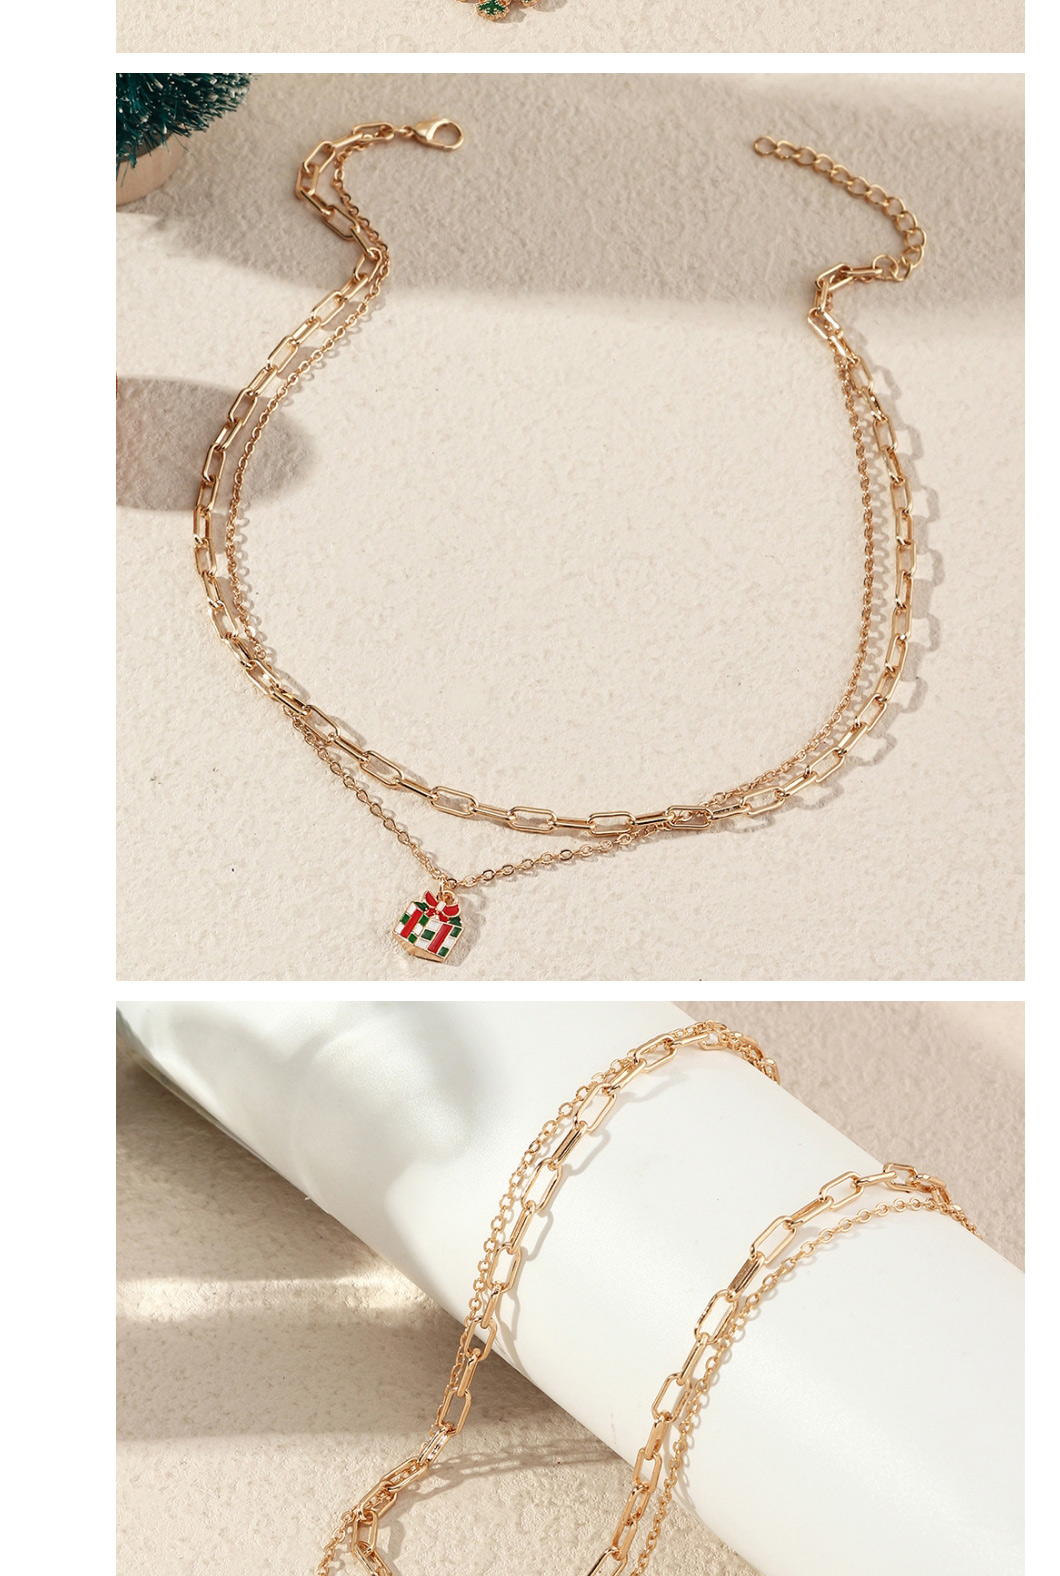 Fashion Snowflake Alloy Dripping Bell Snowflake Christmas Double Necklace,Multi Strand Necklaces